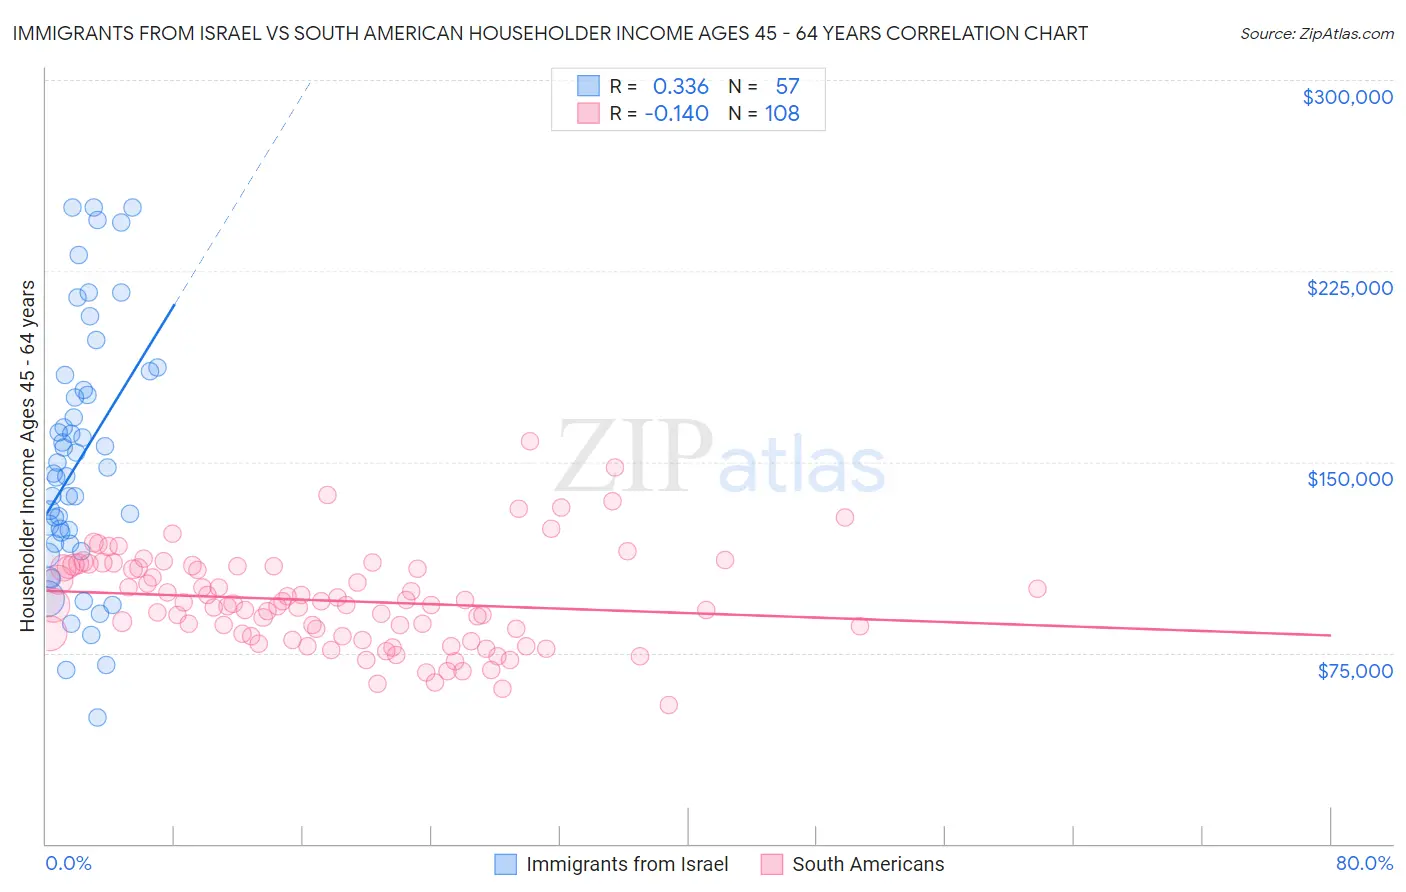 Immigrants from Israel vs South American Householder Income Ages 45 - 64 years